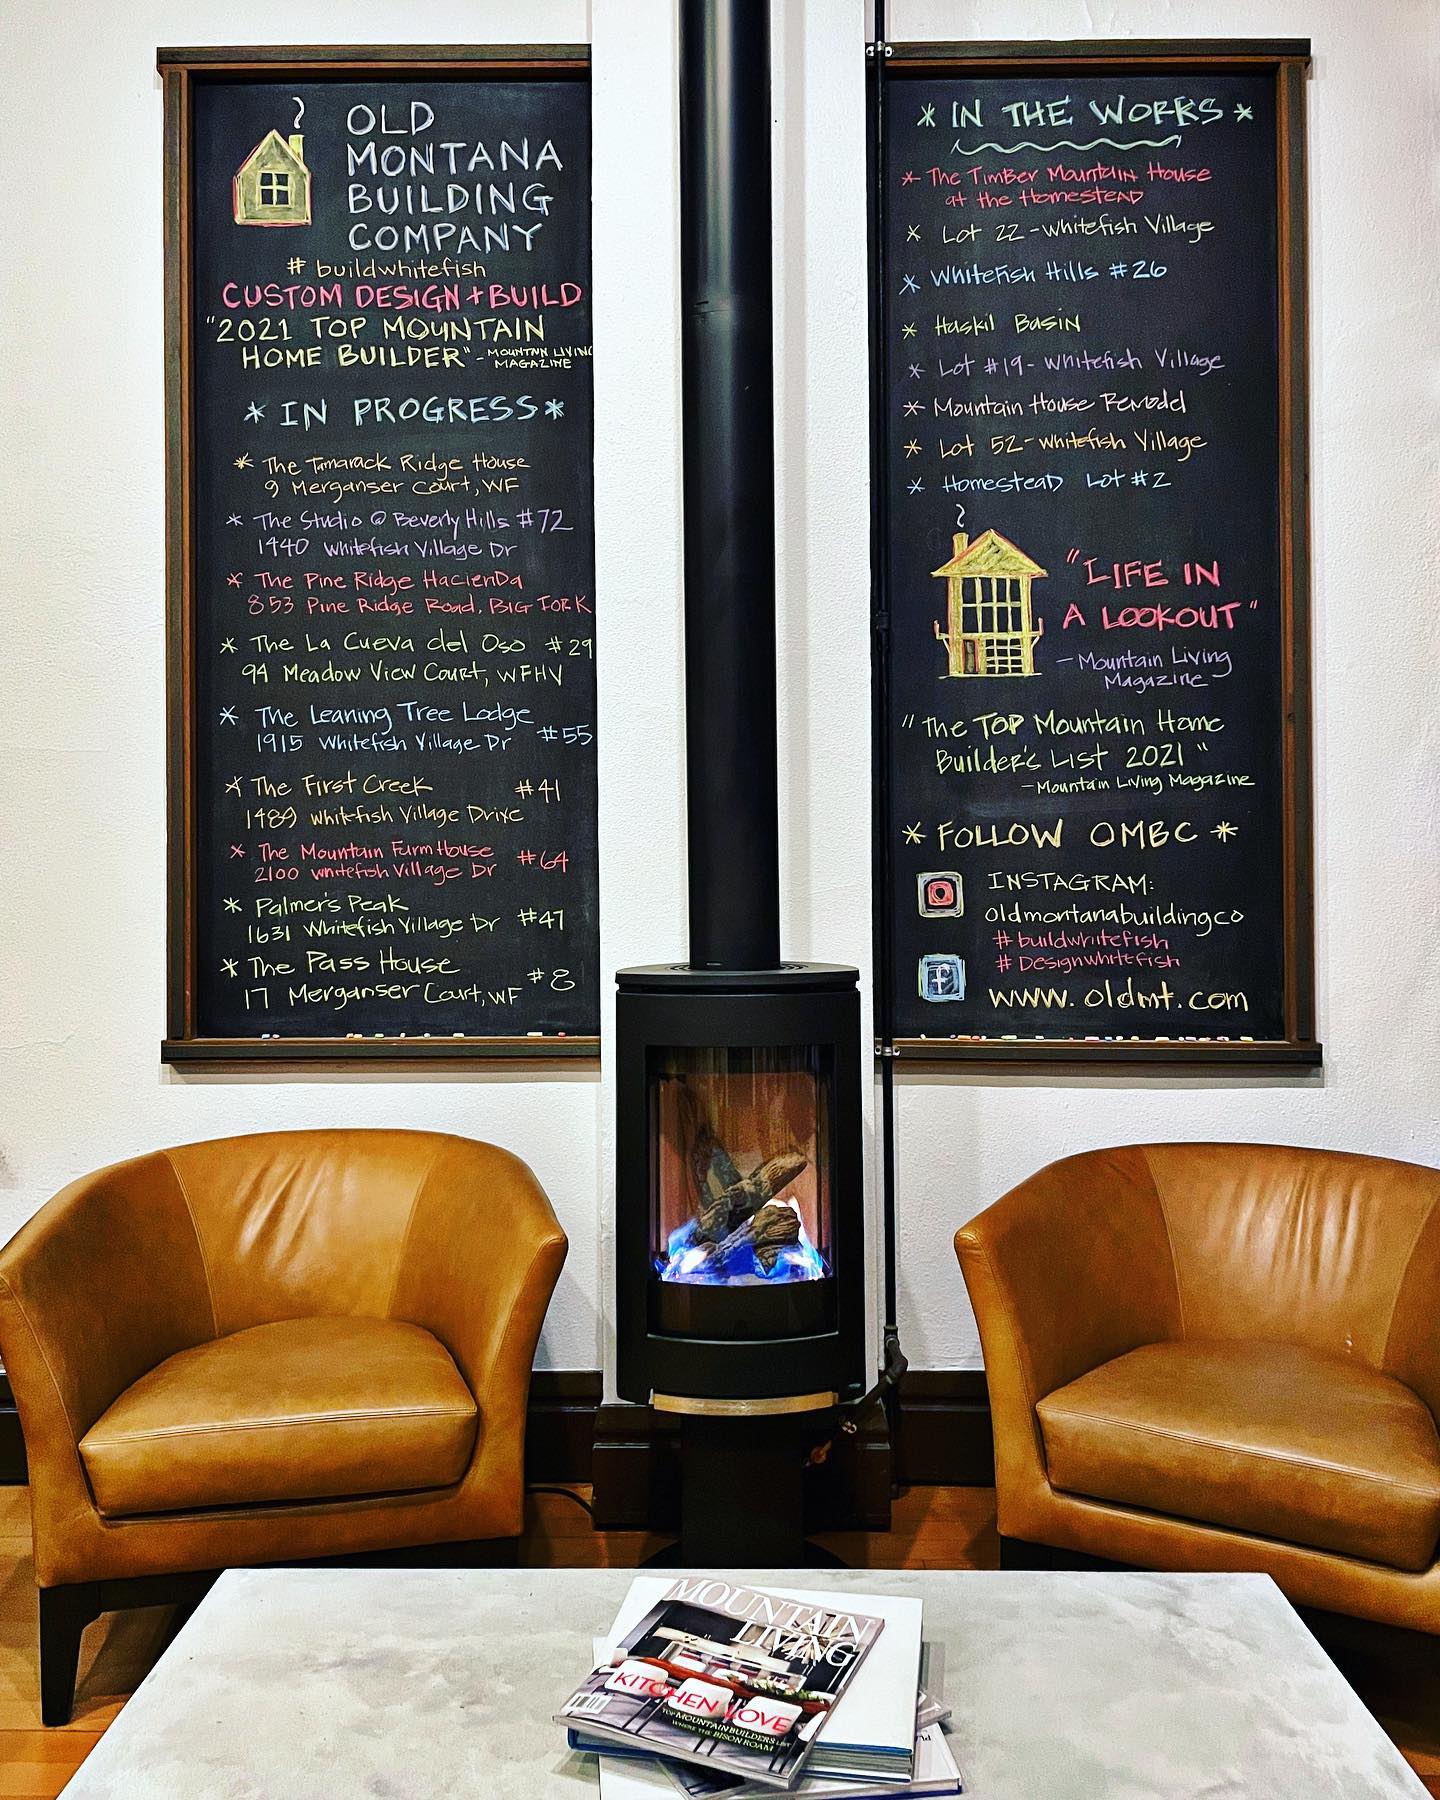 Exciting Friday night date with my chalkboard  much needed updated list!! whitefish custom home builder